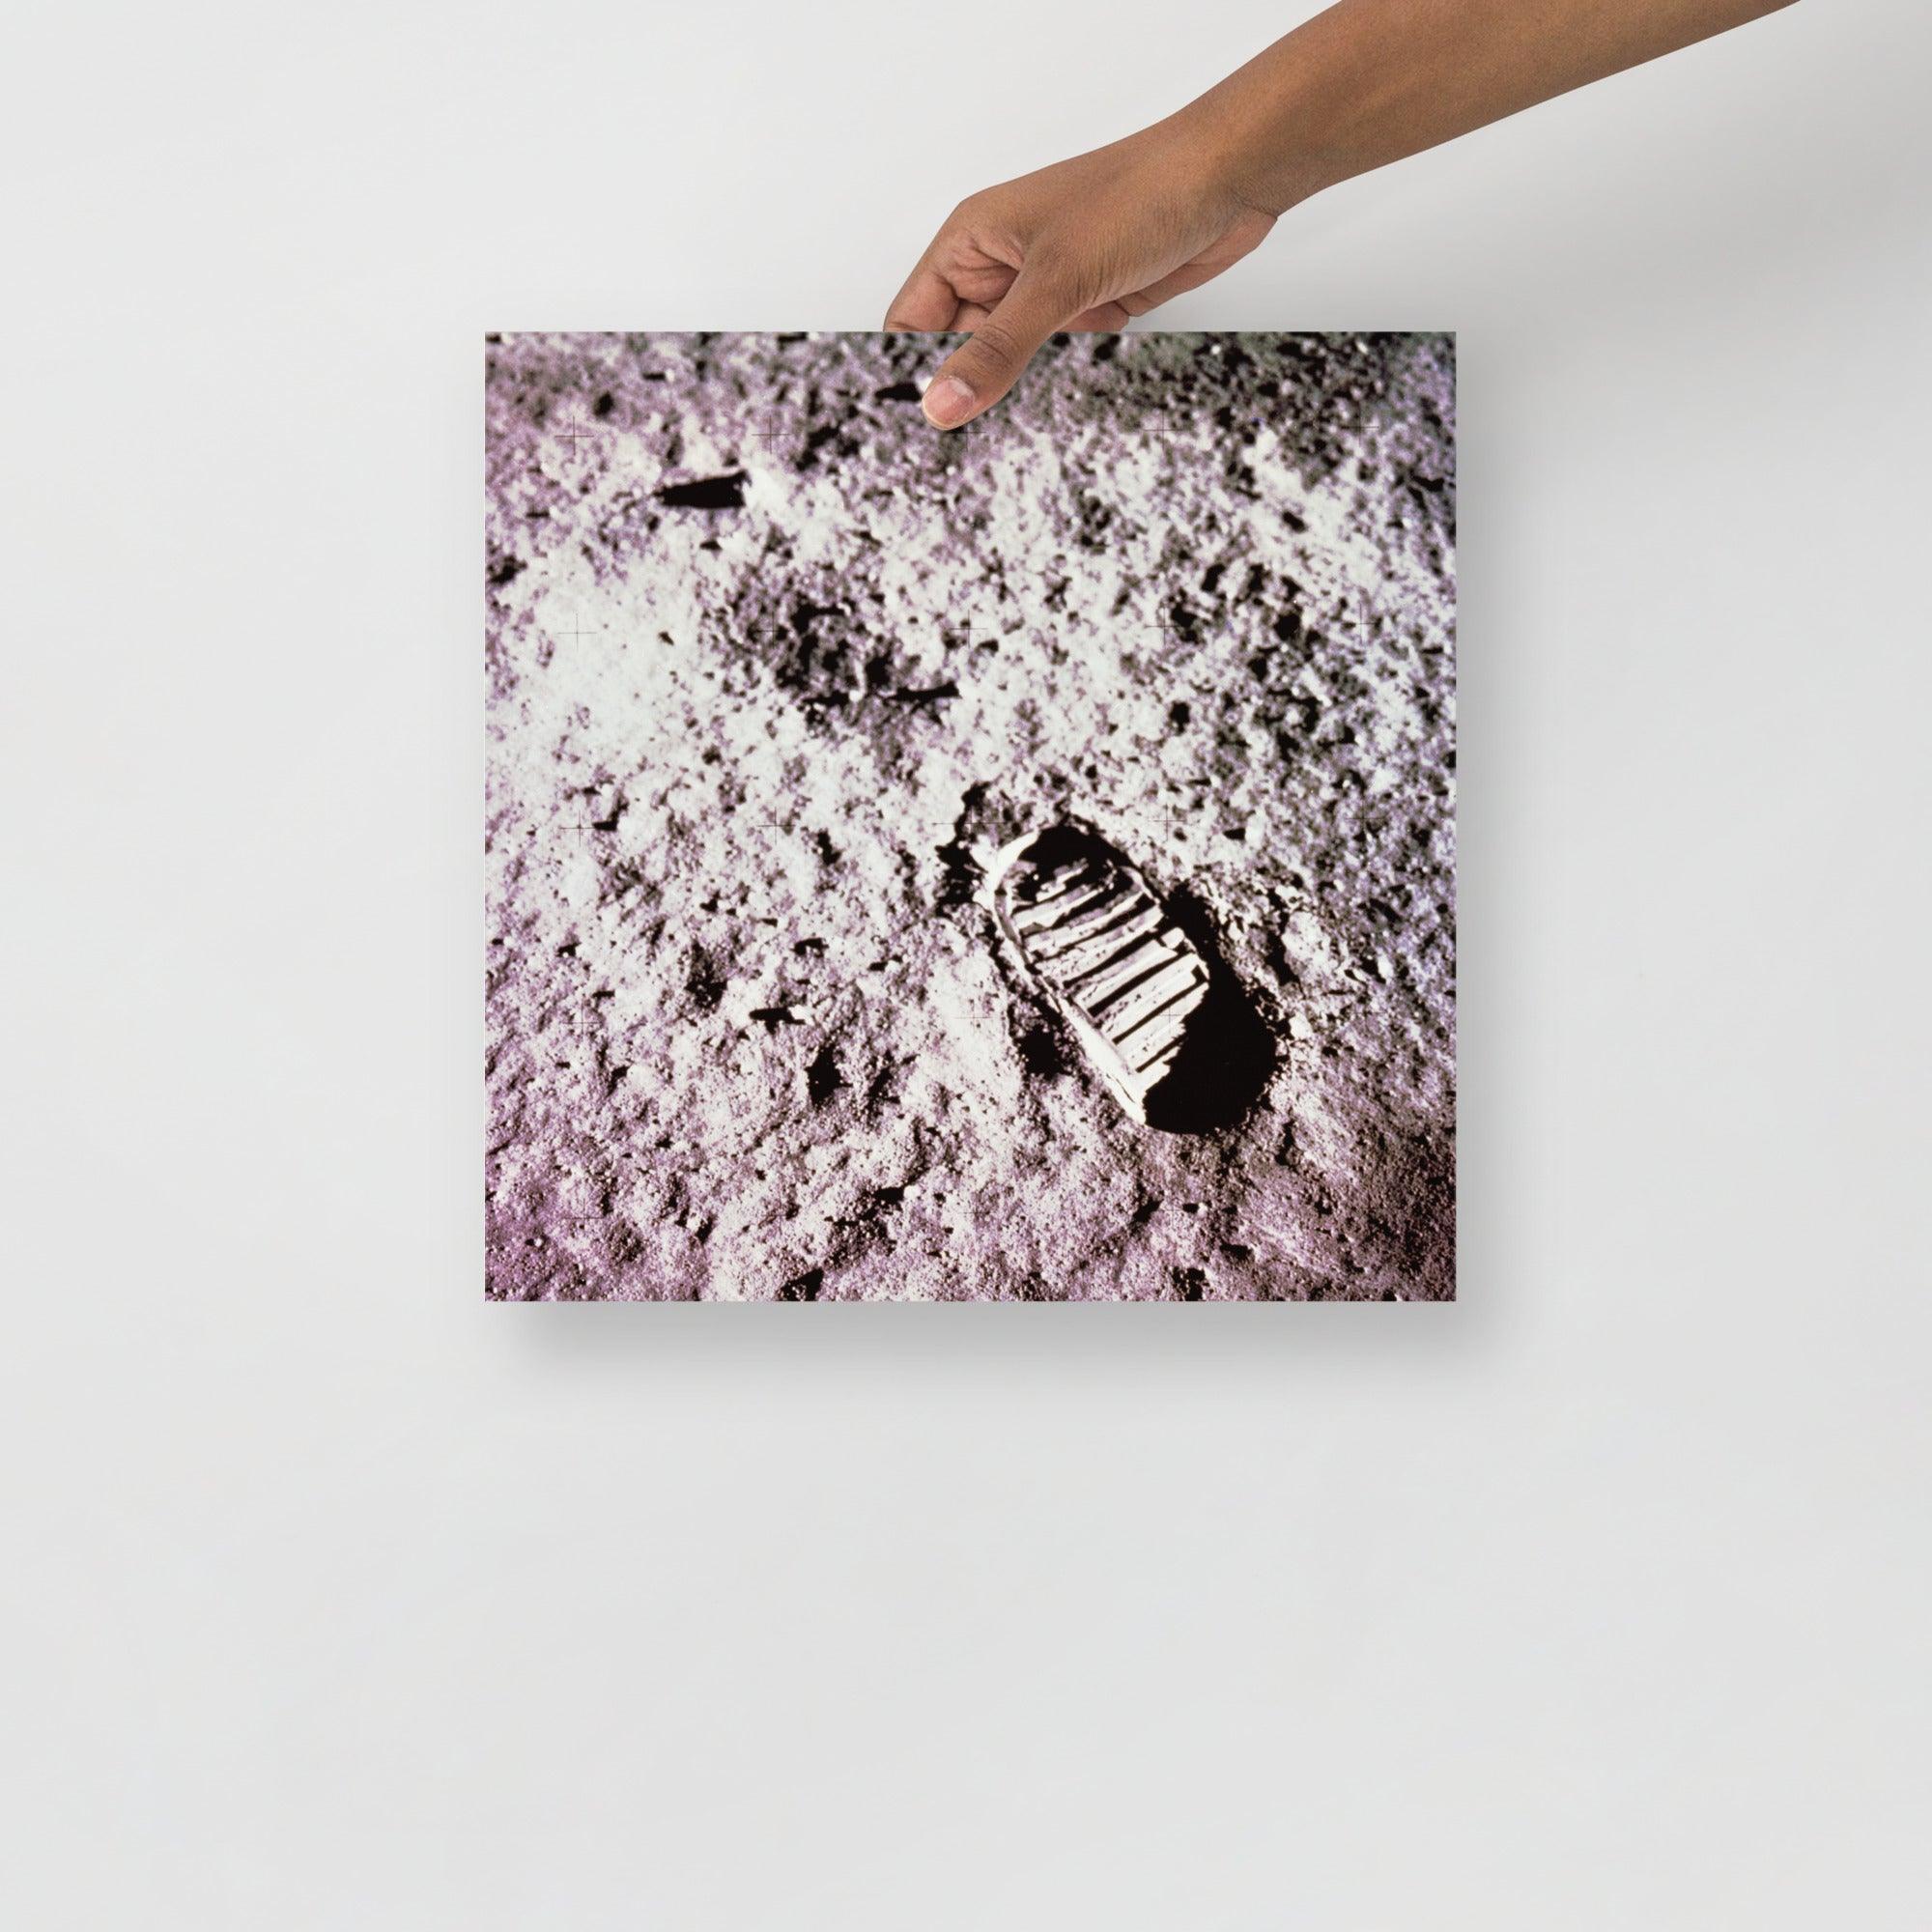 A Footprint on the Moon Apollo 11 poster on a plain backdrop in size 14x14”.